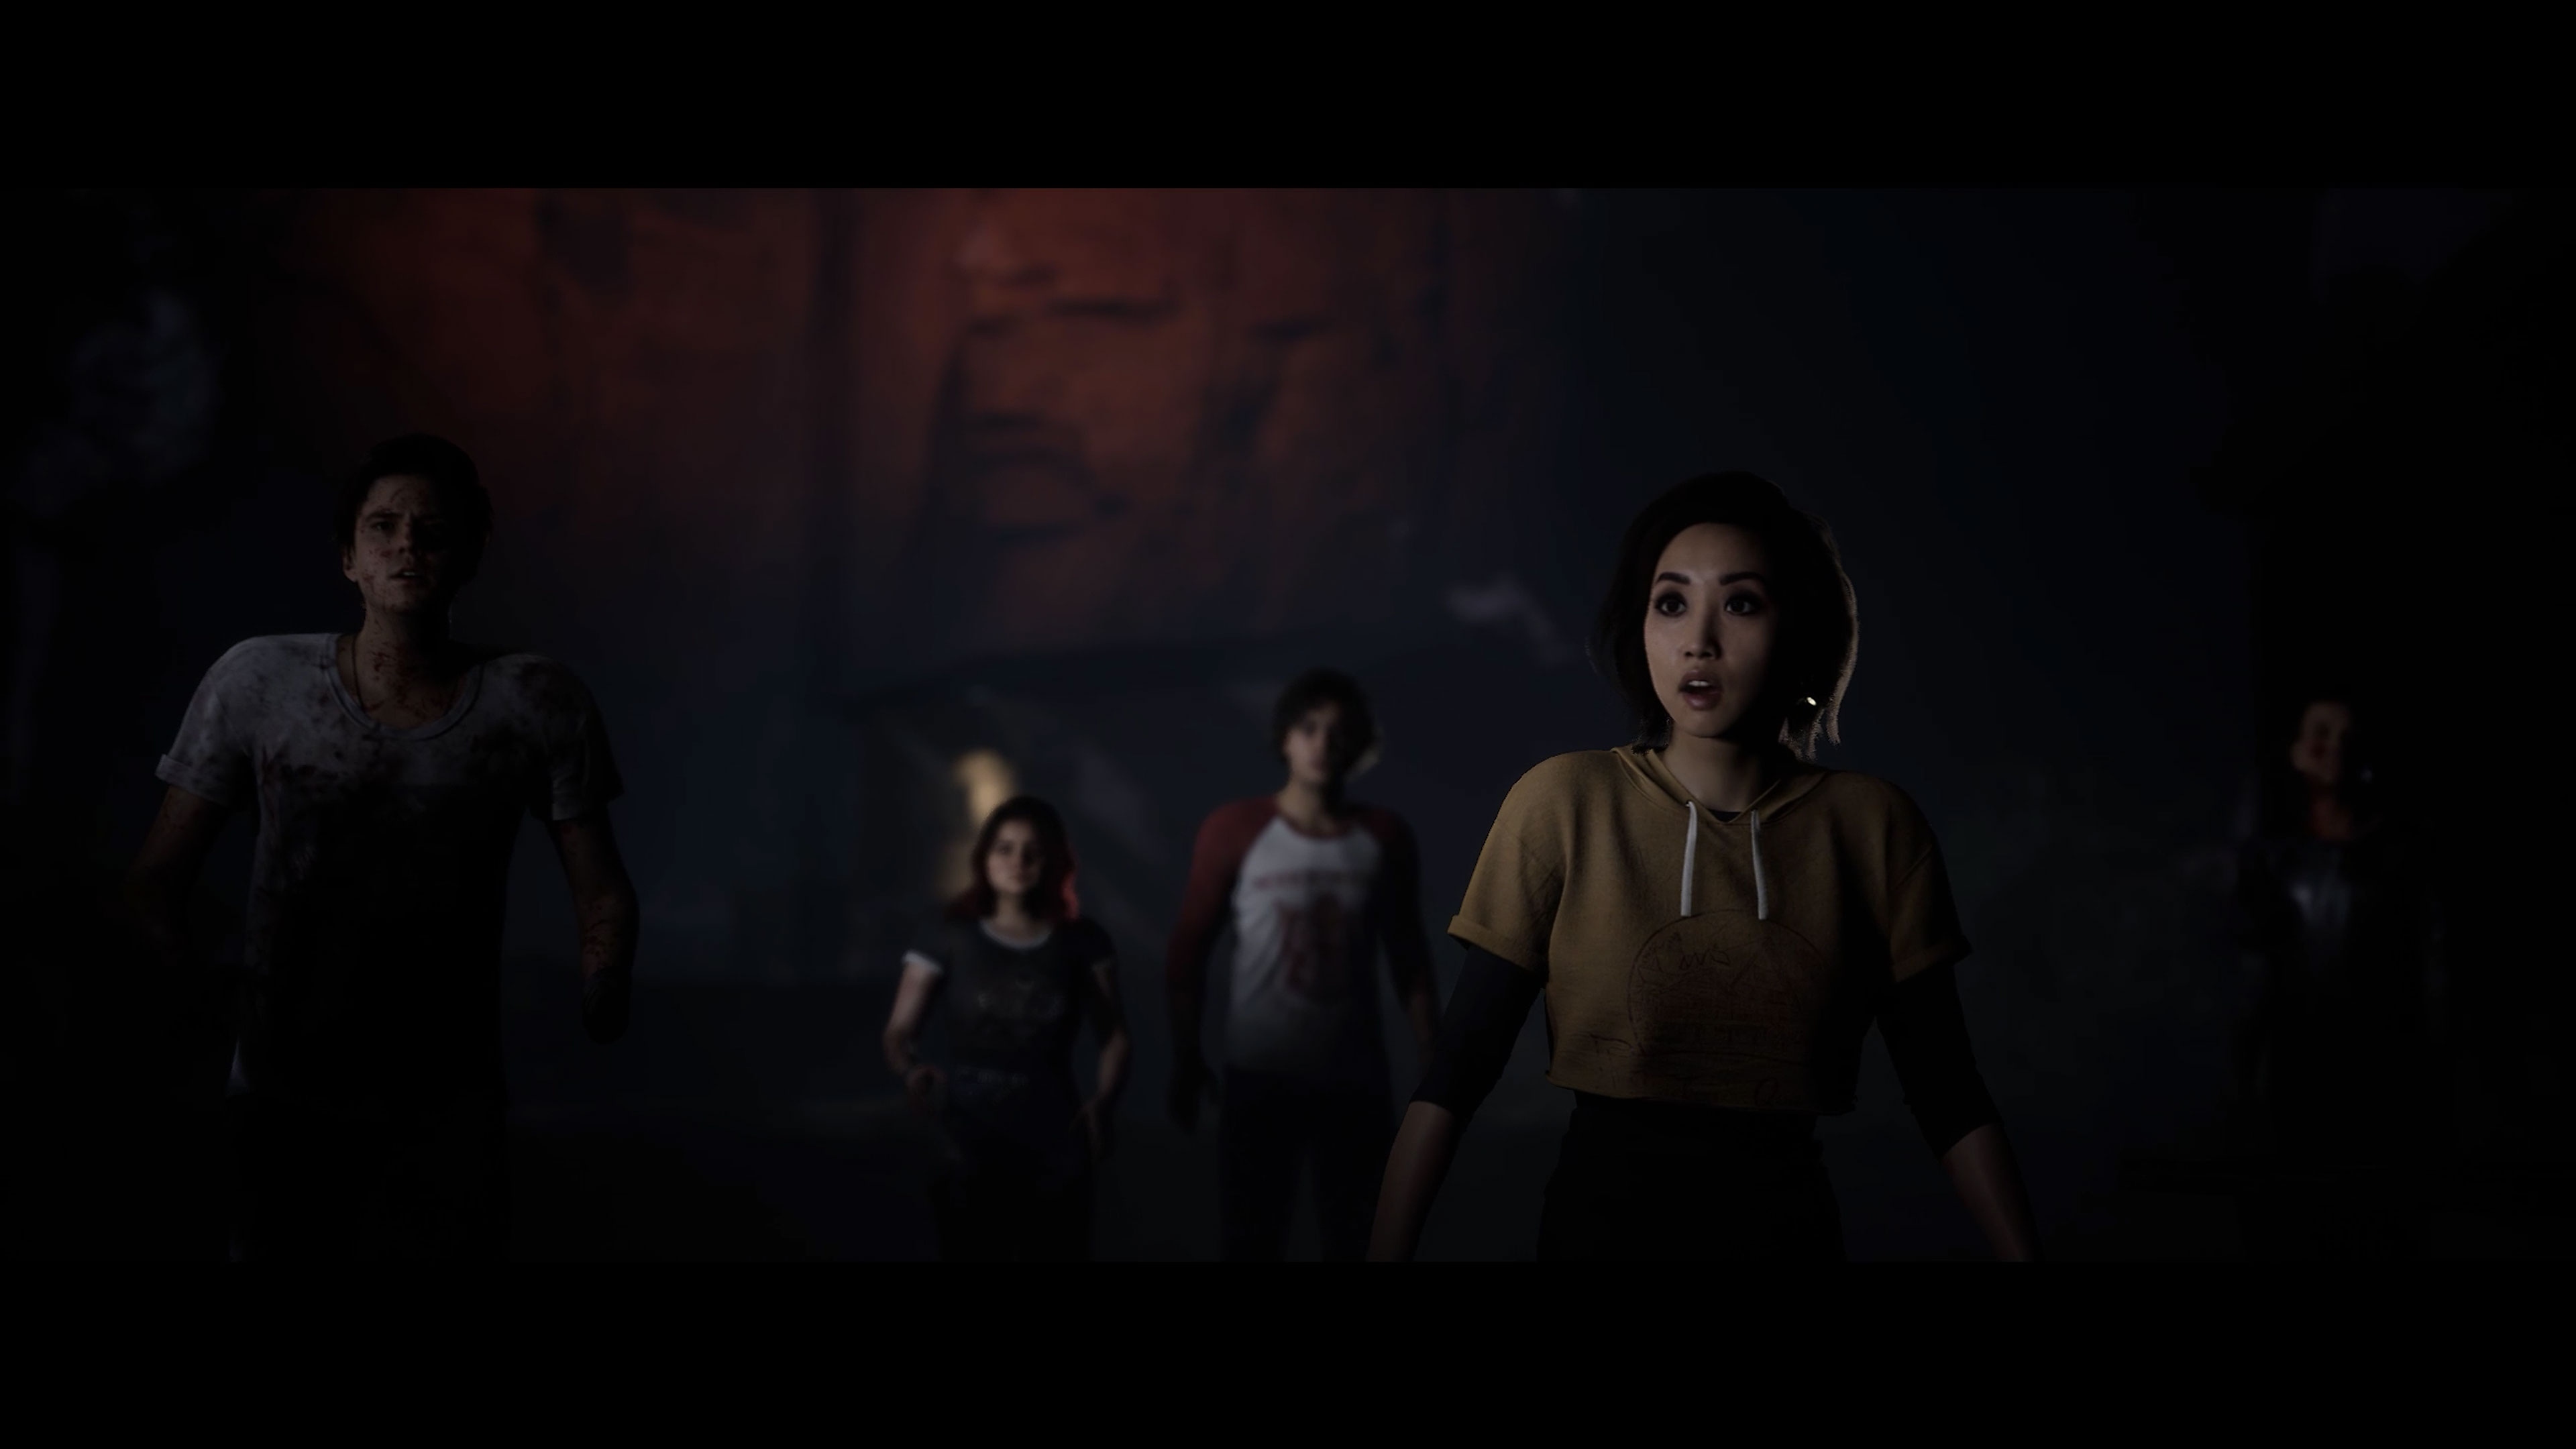 The Quarry screenshot showing a group of characters